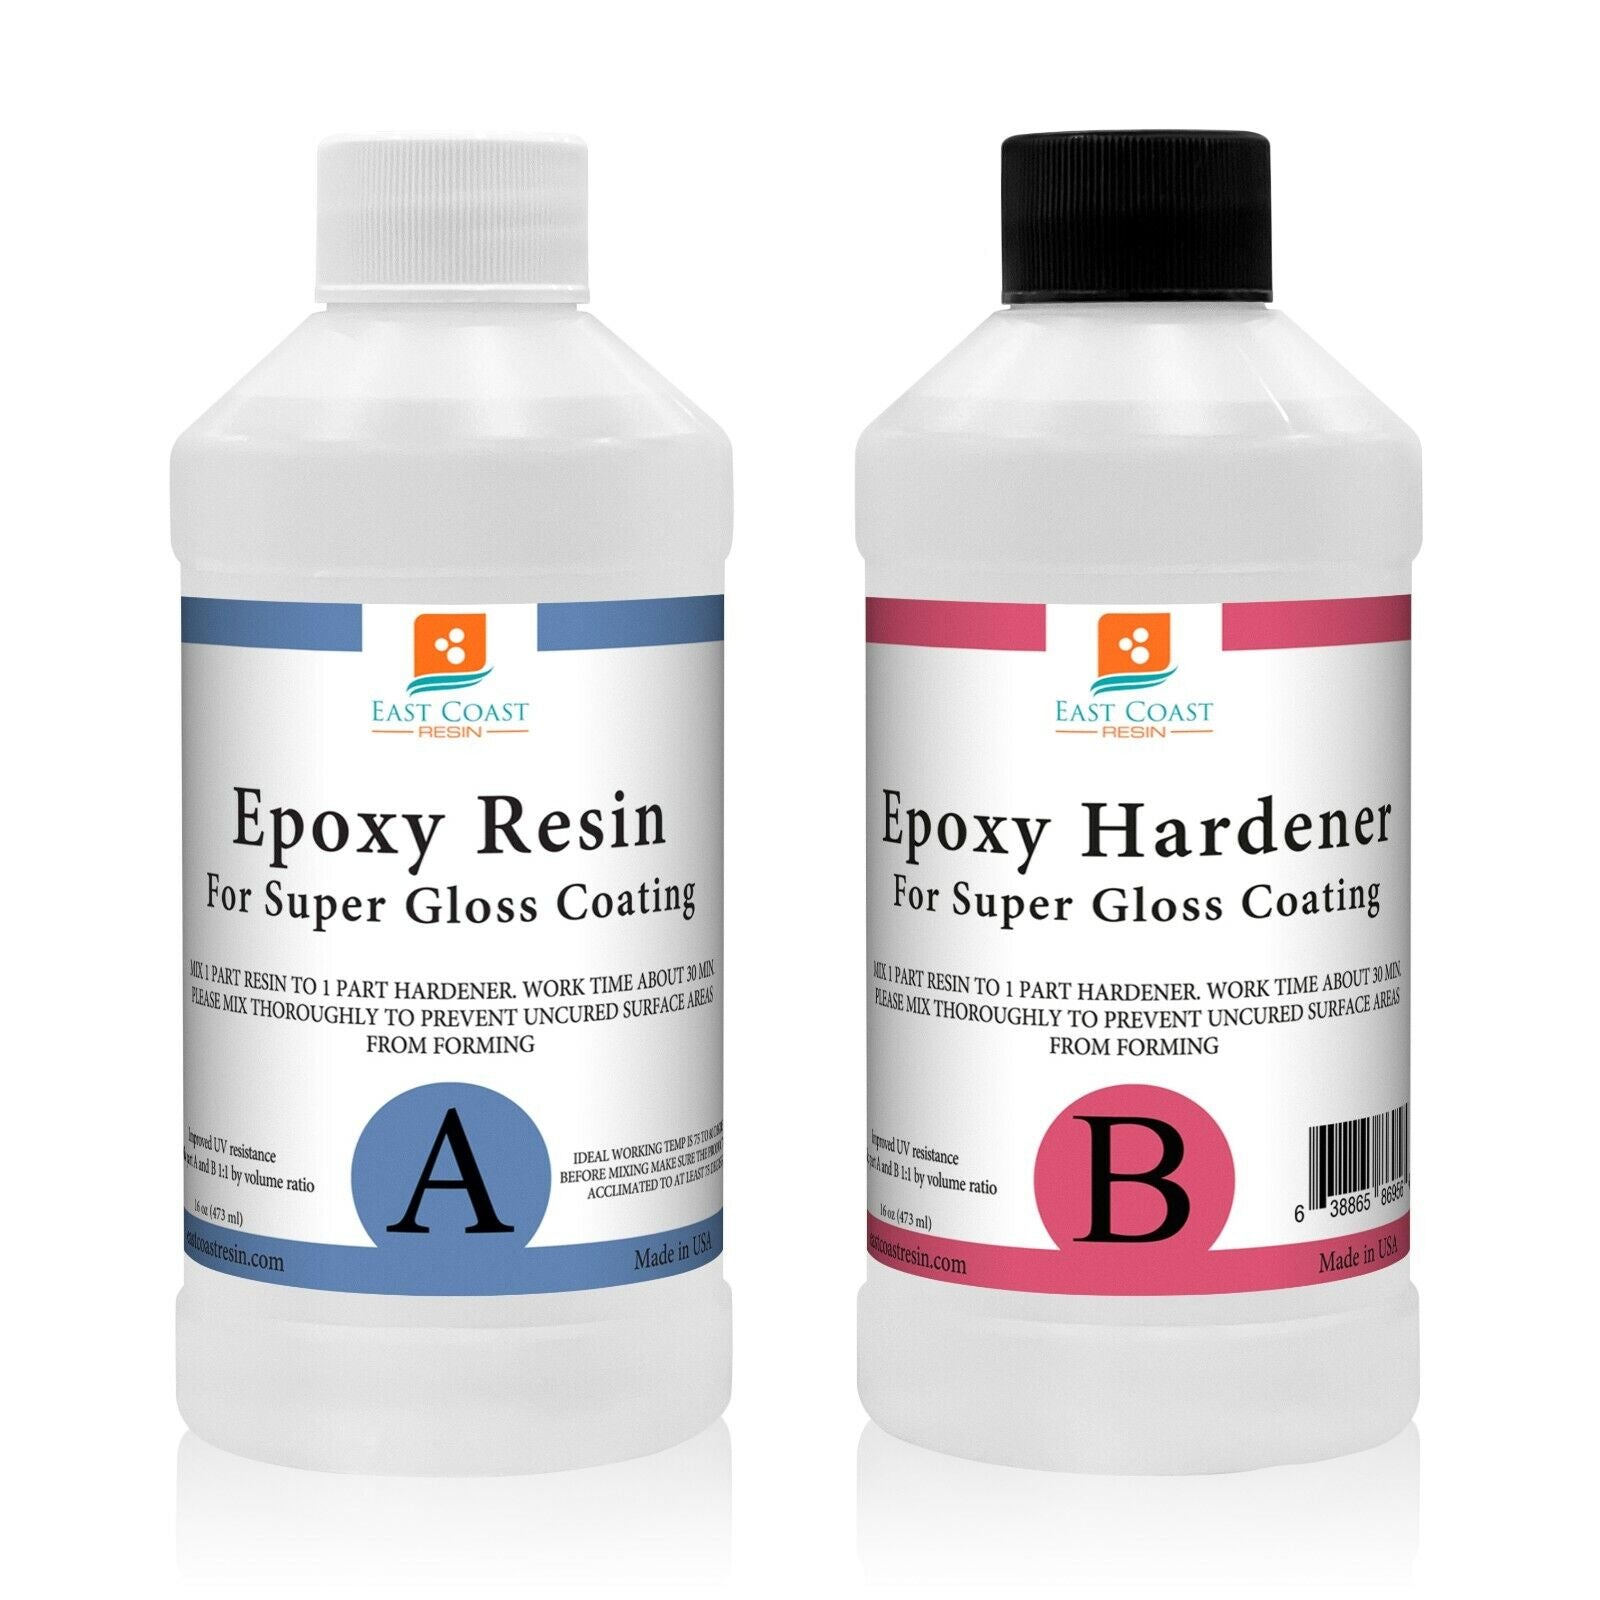 EPOXY RESIN 32 oz Kit for Super Gloss Coating and Table Tops